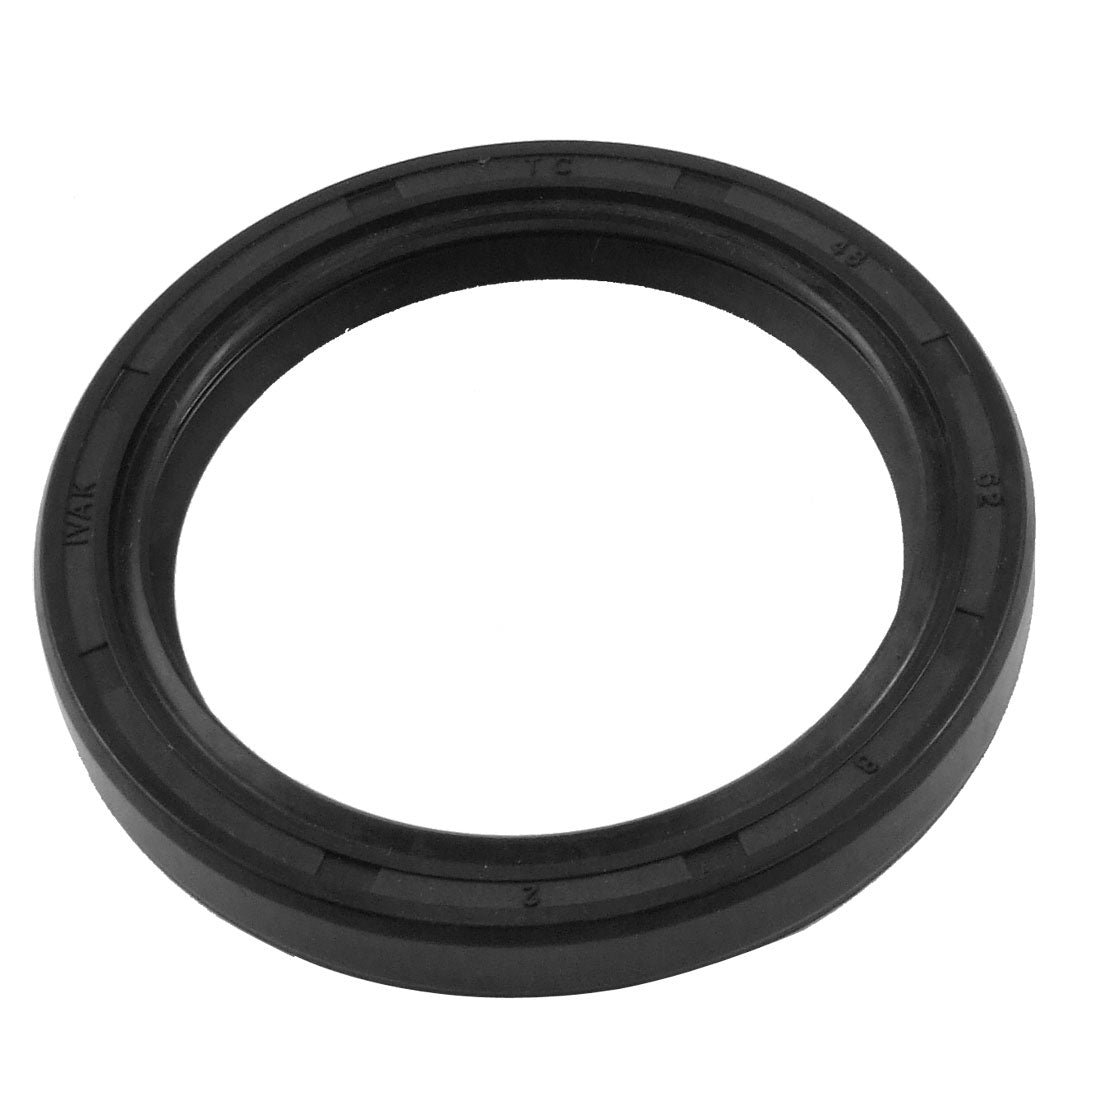 uxcell Uxcell Oil Seal, Nitrile Butadiene Rubber Black Pack of 1